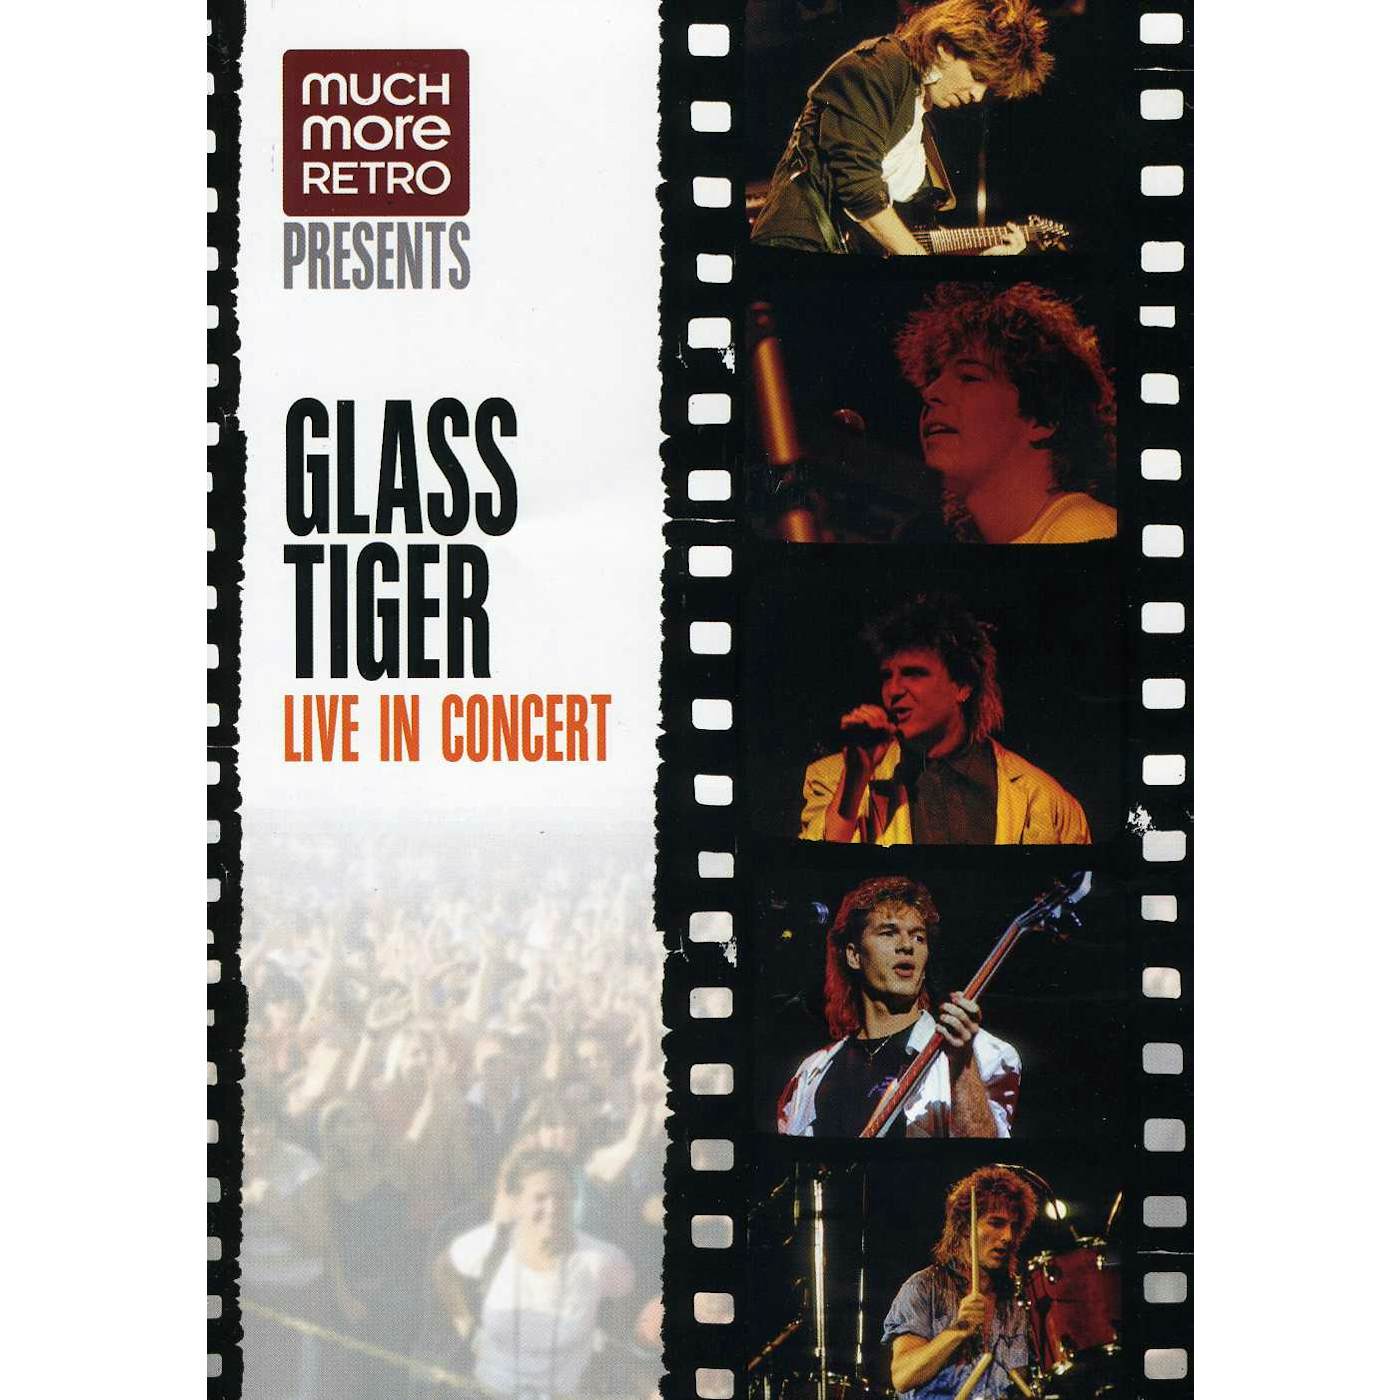 Glass Tiger LIVE IN CONCERT DVD